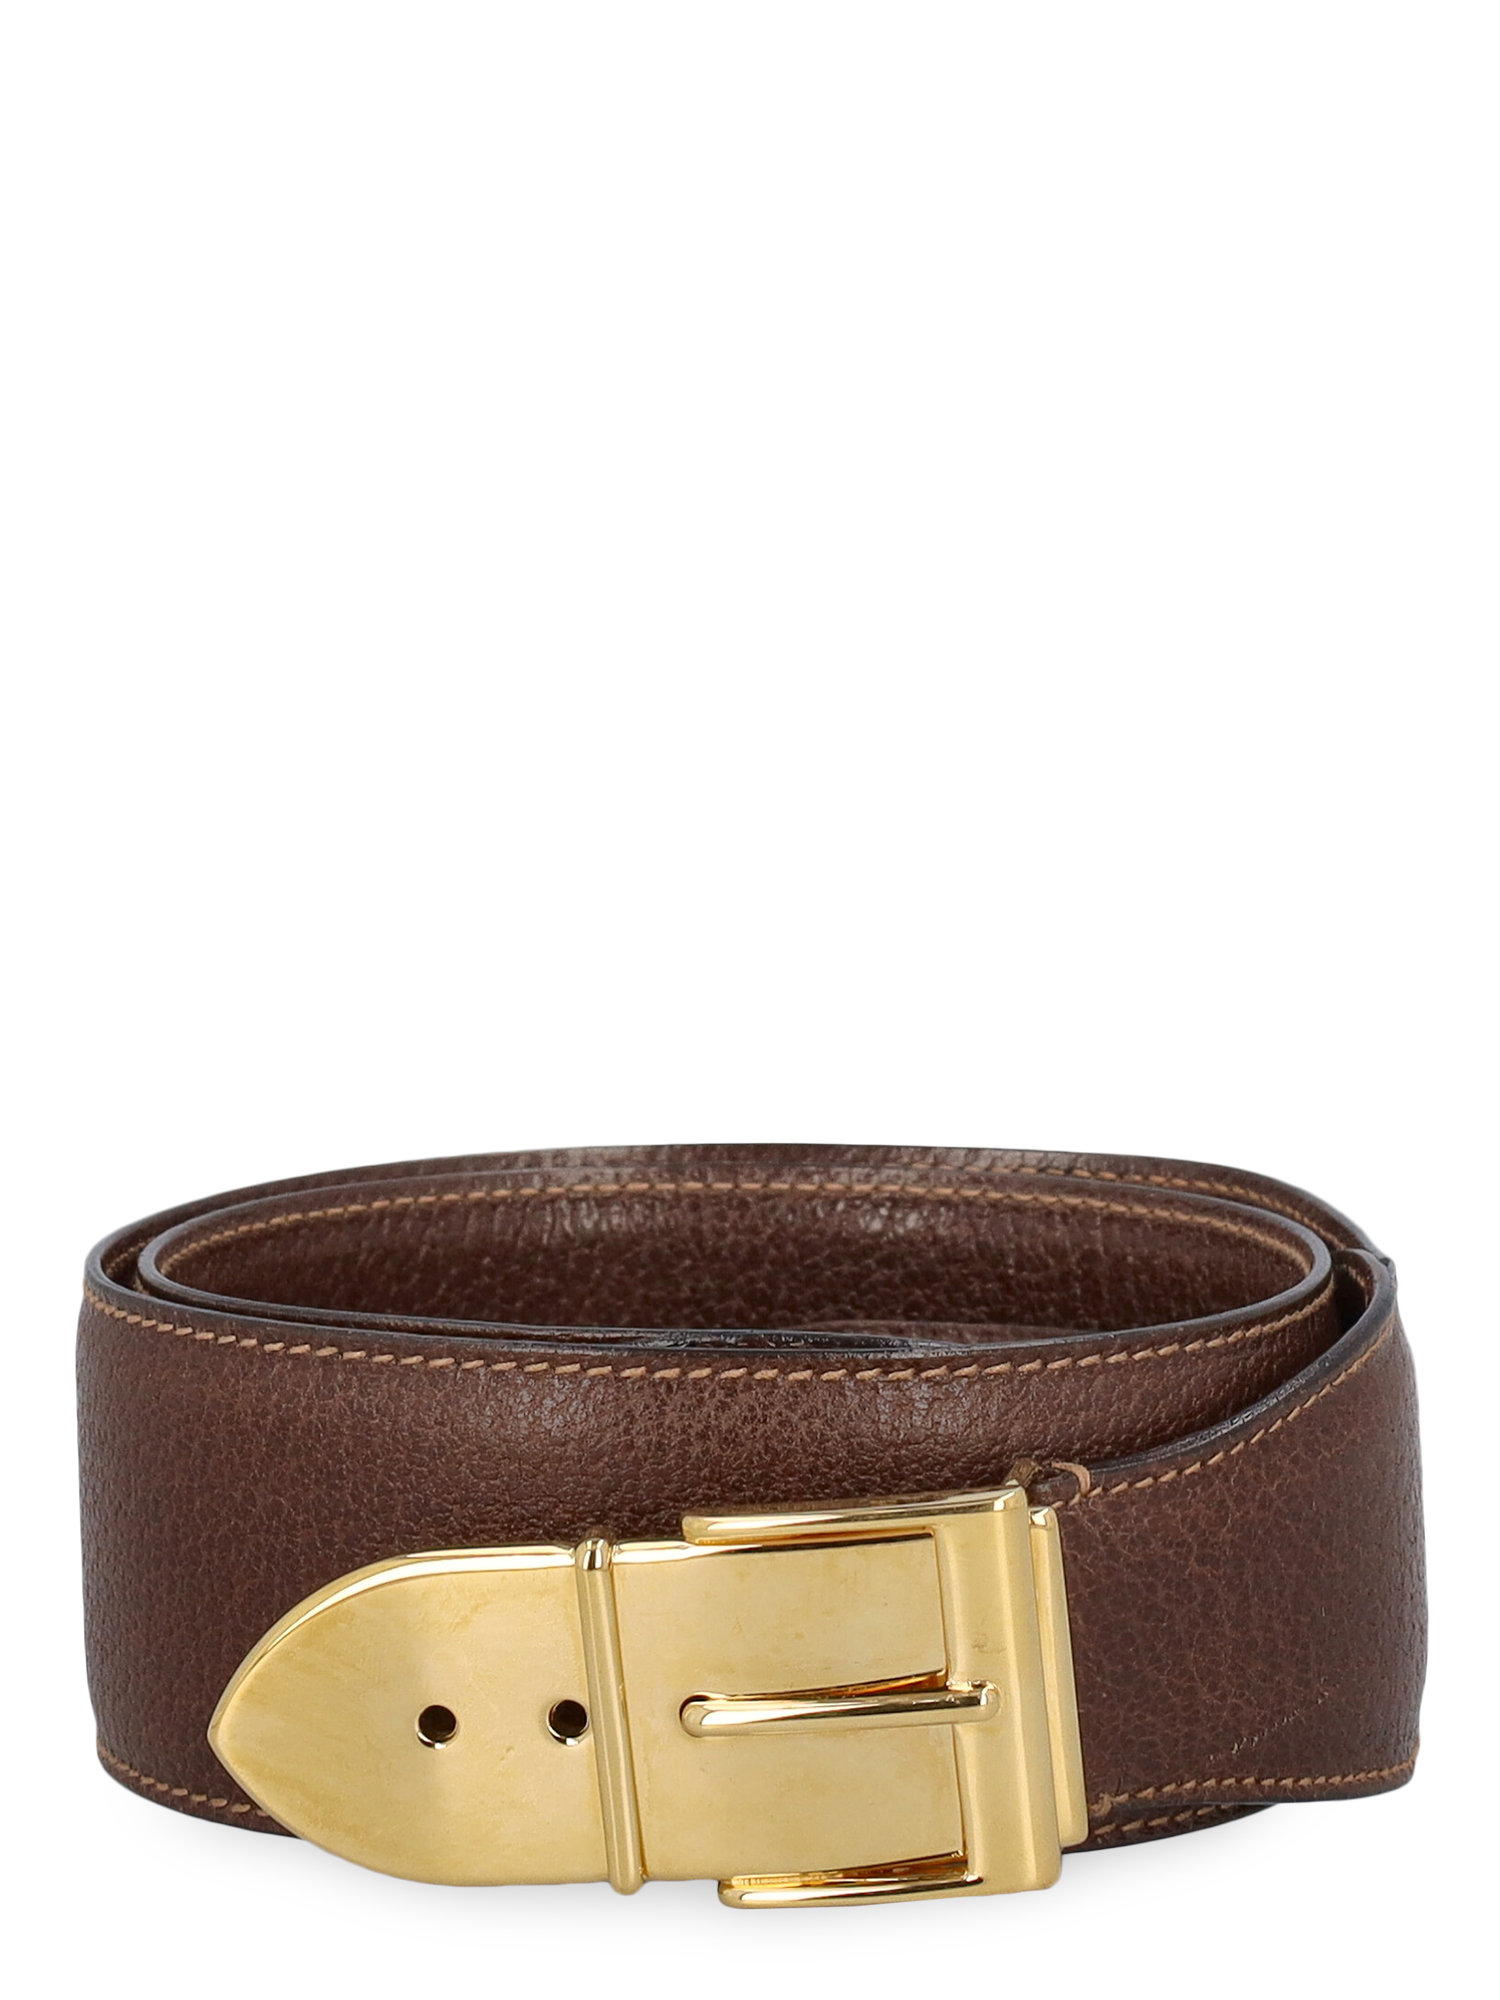 Pre-owned Gucci Women's Belts -  - In Brown Leather